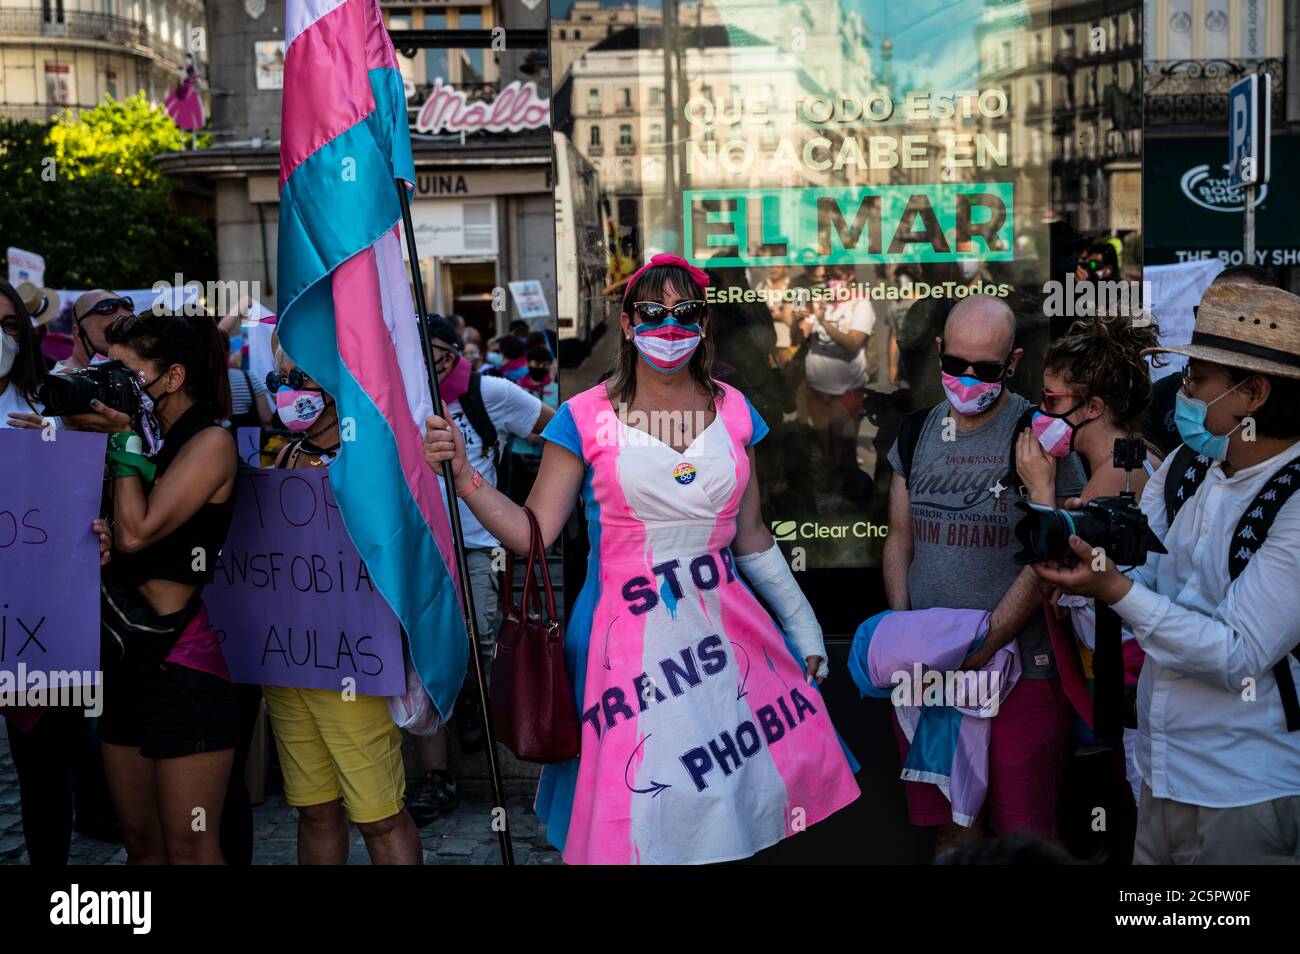 Madrid, Spain. 04th July, 2020. Demonstrator wearing the Trans flag attends a protest where Trans community demand a state law that will guarantee gender self-determination. The protest coincides with the Pride celebrations that are taking place this week. Credit: Marcos del Mazo/Alamy Live News Stock Photo